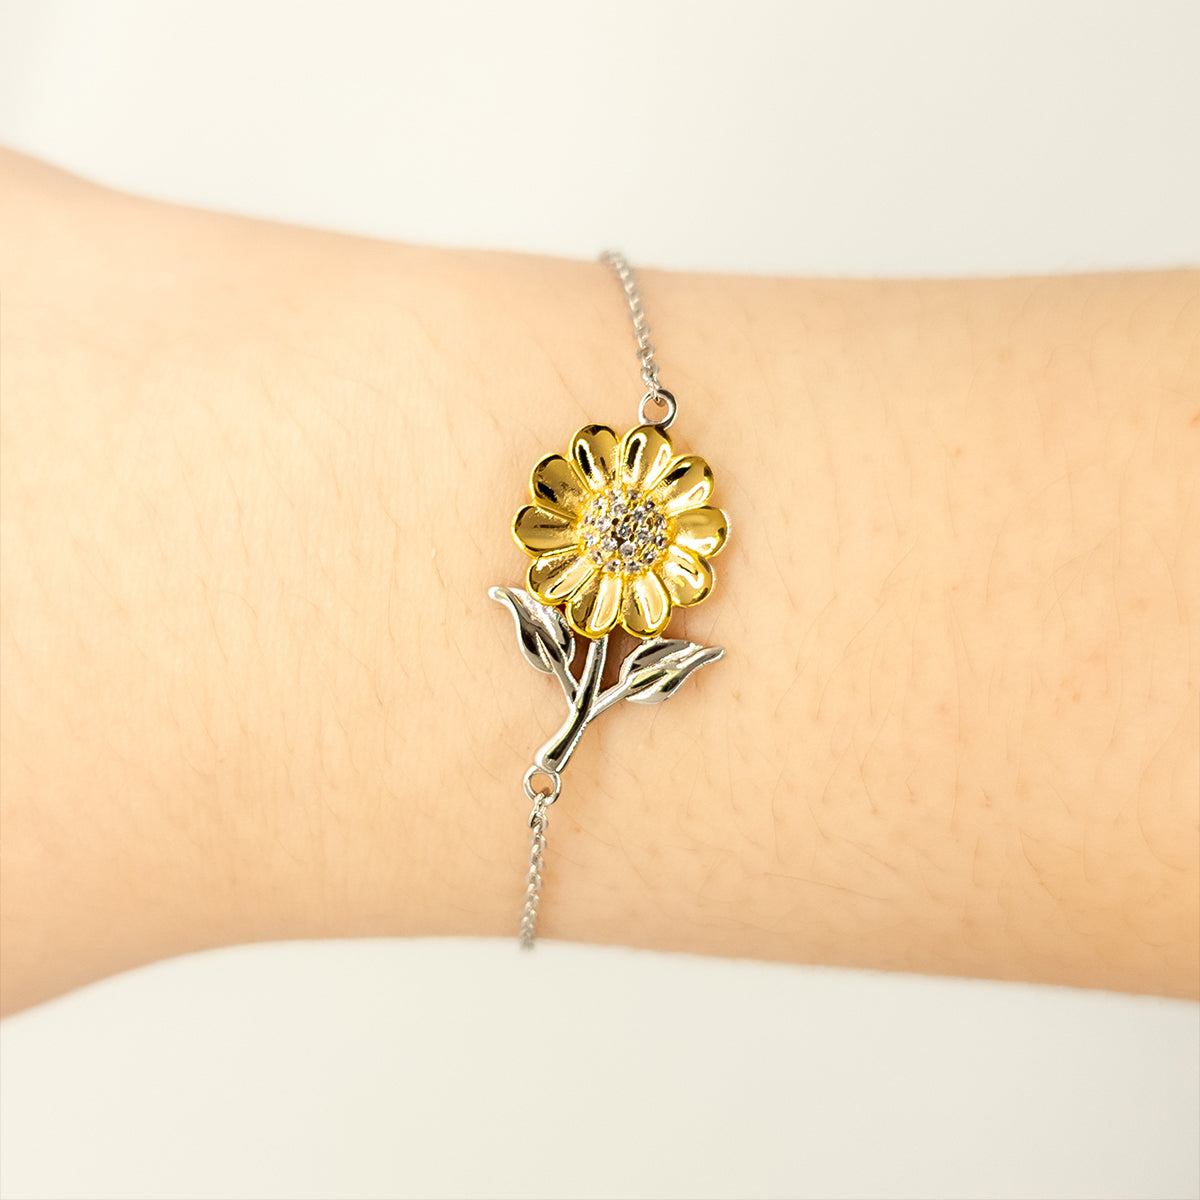 Grandad Sunflower Bracelet - Engraved Gift for Grandad, Inspirational Jewelry for Birthday, Christmas, and Graduation, Always in My Heart